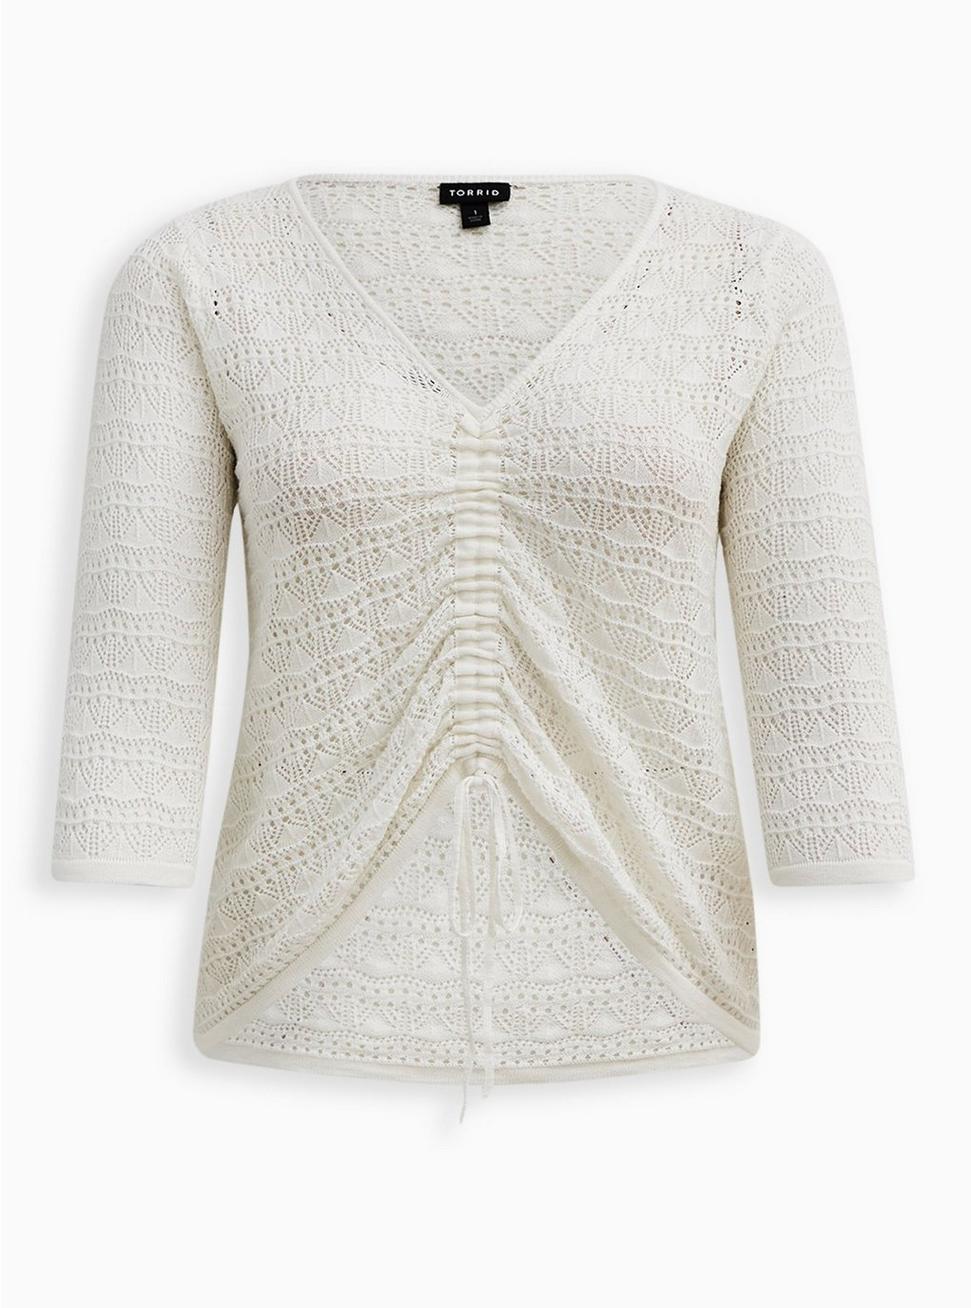 Open Stitch Pullover V-Neck Cinched Front Sweater, WHITE, hi-res